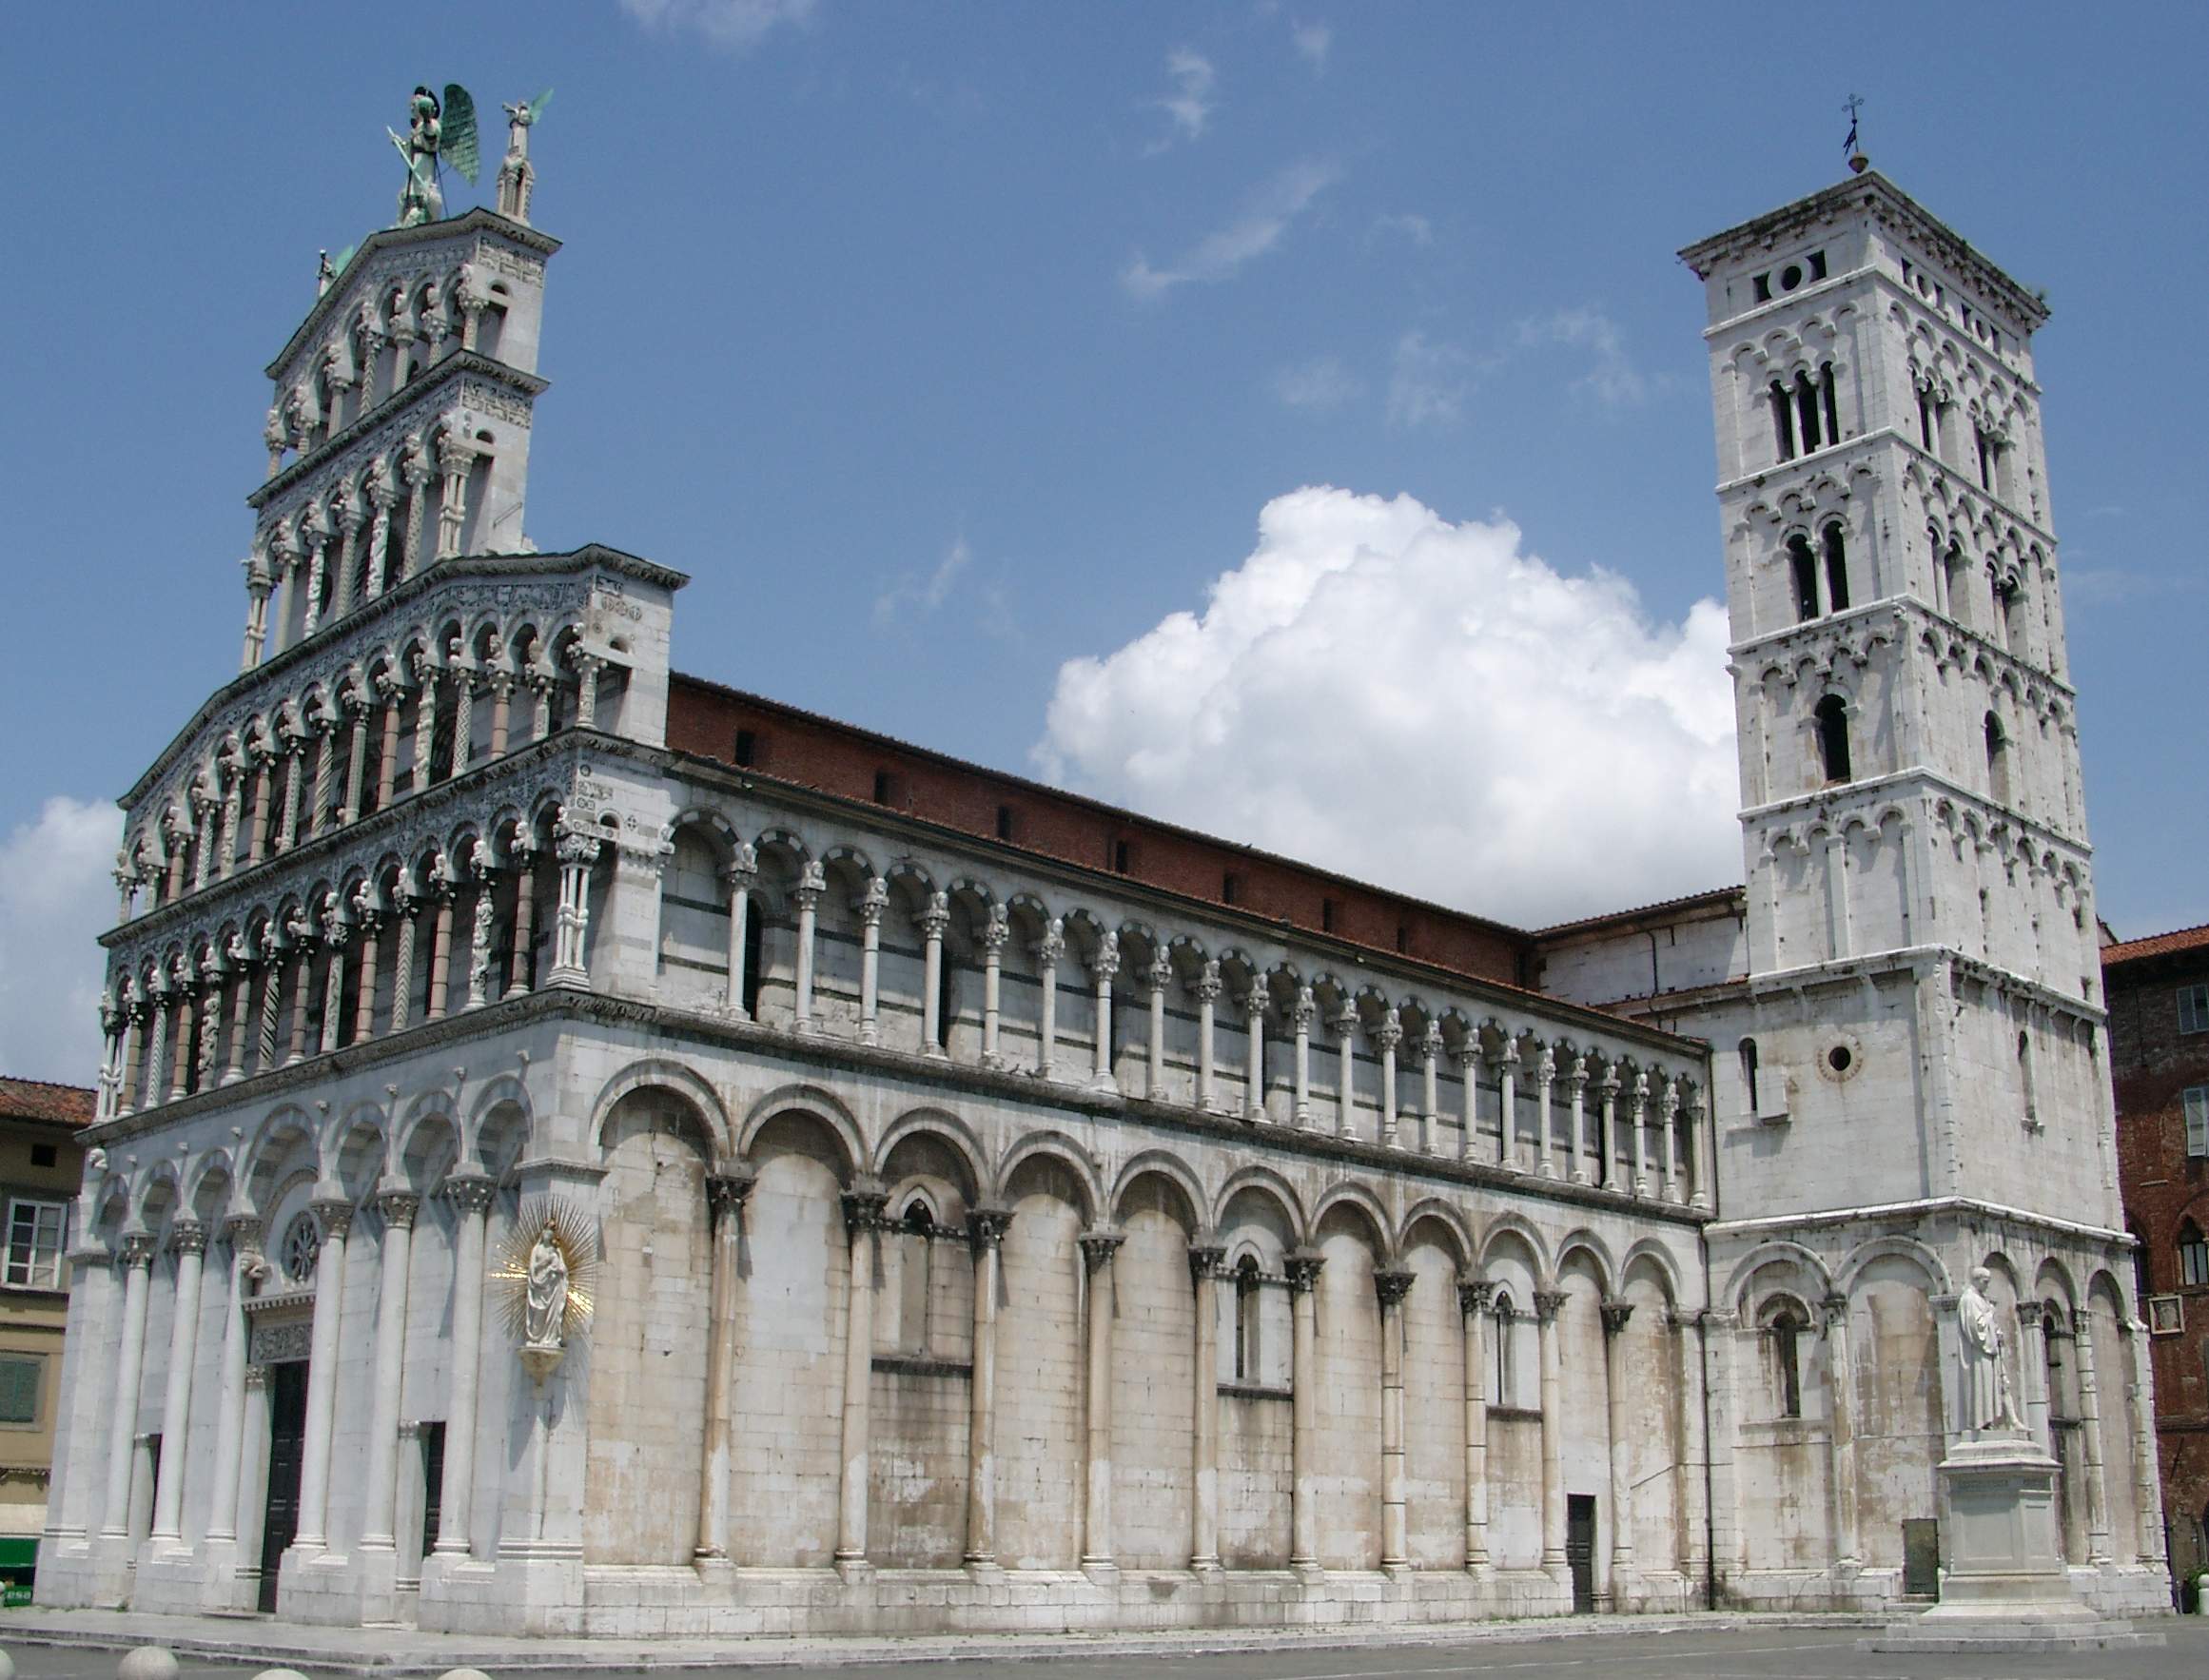 San Michele, Lucca Photograph details are available here